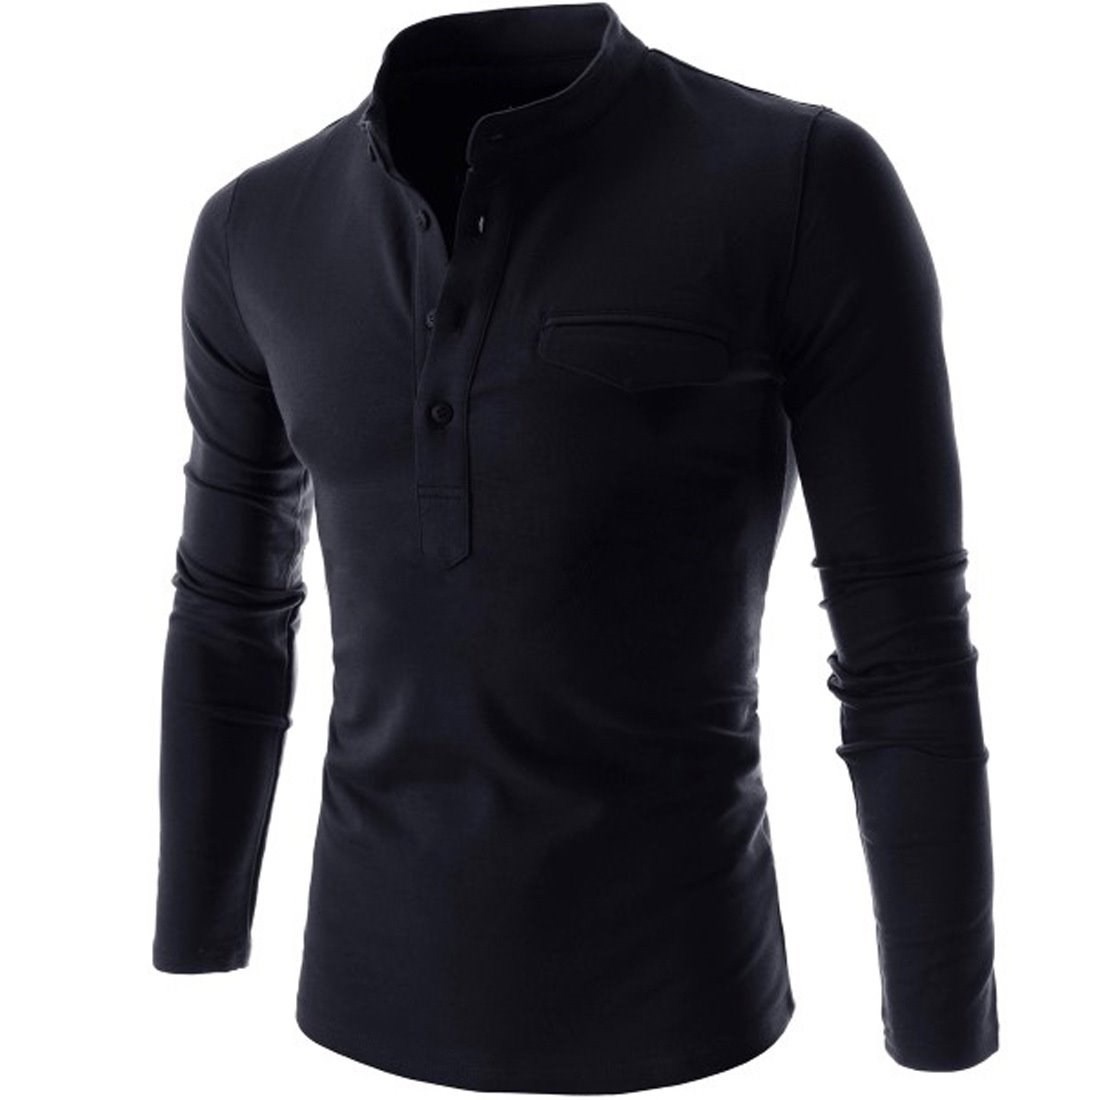 In the spring and autumn of 2018, the new solid color long sleeve vertical cardigan stand collar gentleman bottoming shirt and long sleeve polo shirt are in fashion